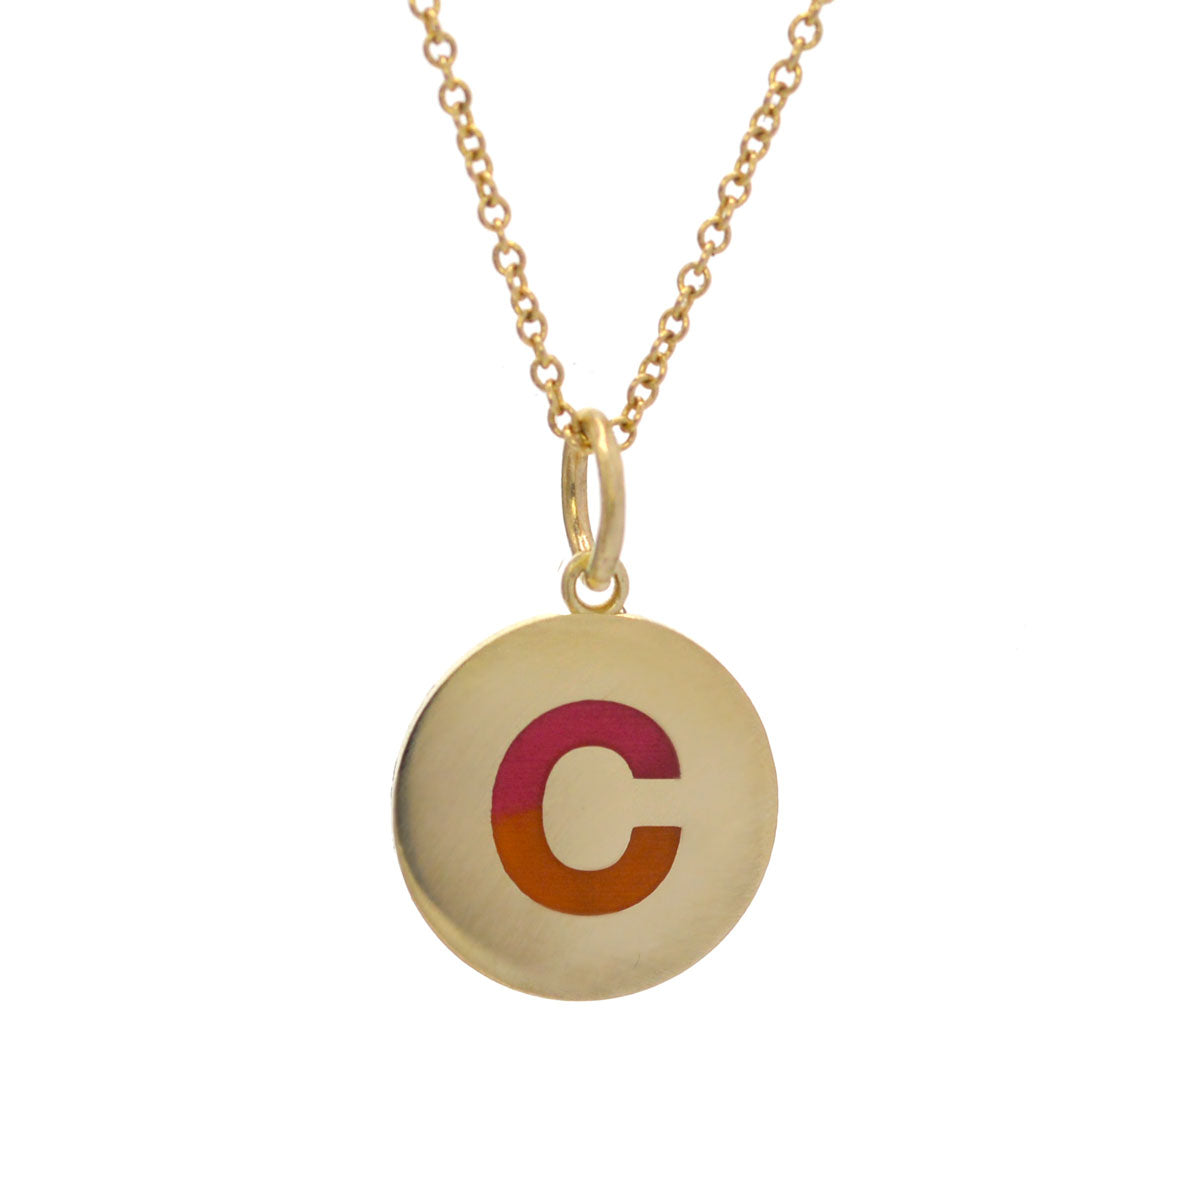 Custom Initial Necklace - Shop For Custom Initial Necklace Online |  HotMixCold